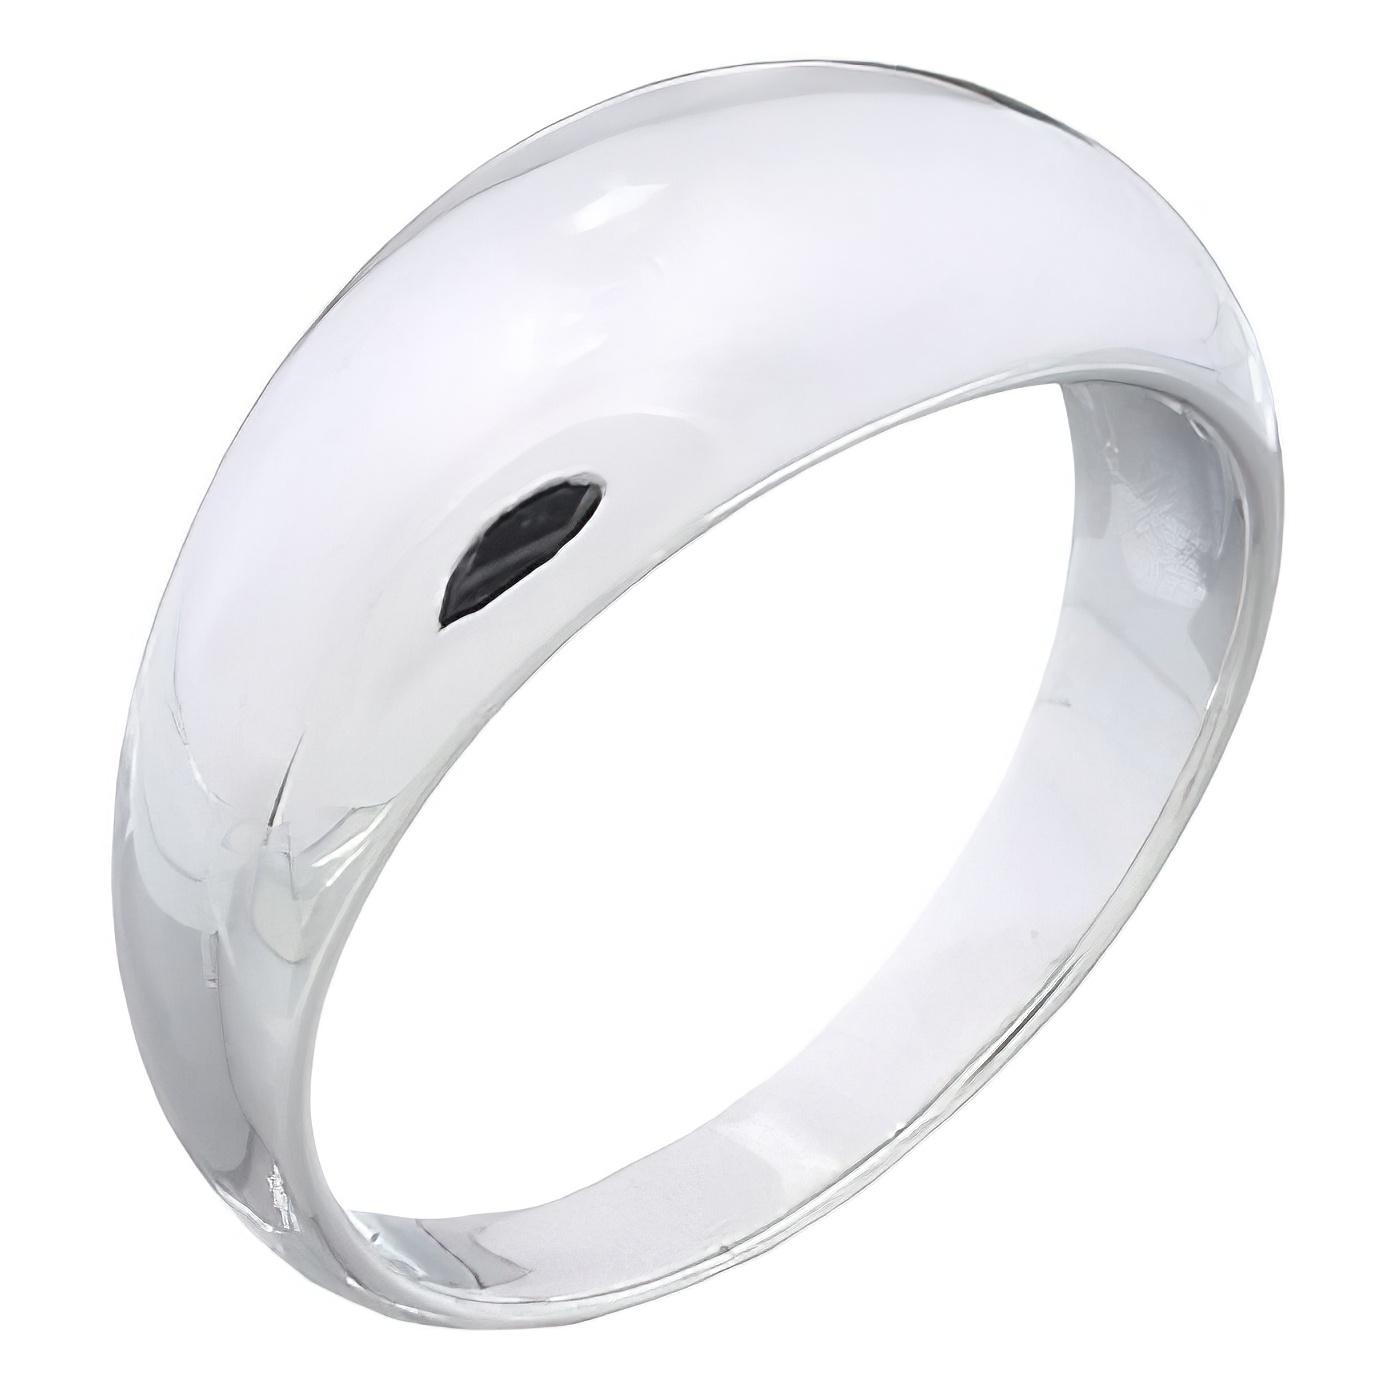 Signet Dome 925 Silver Plain Ring by BeYindi 